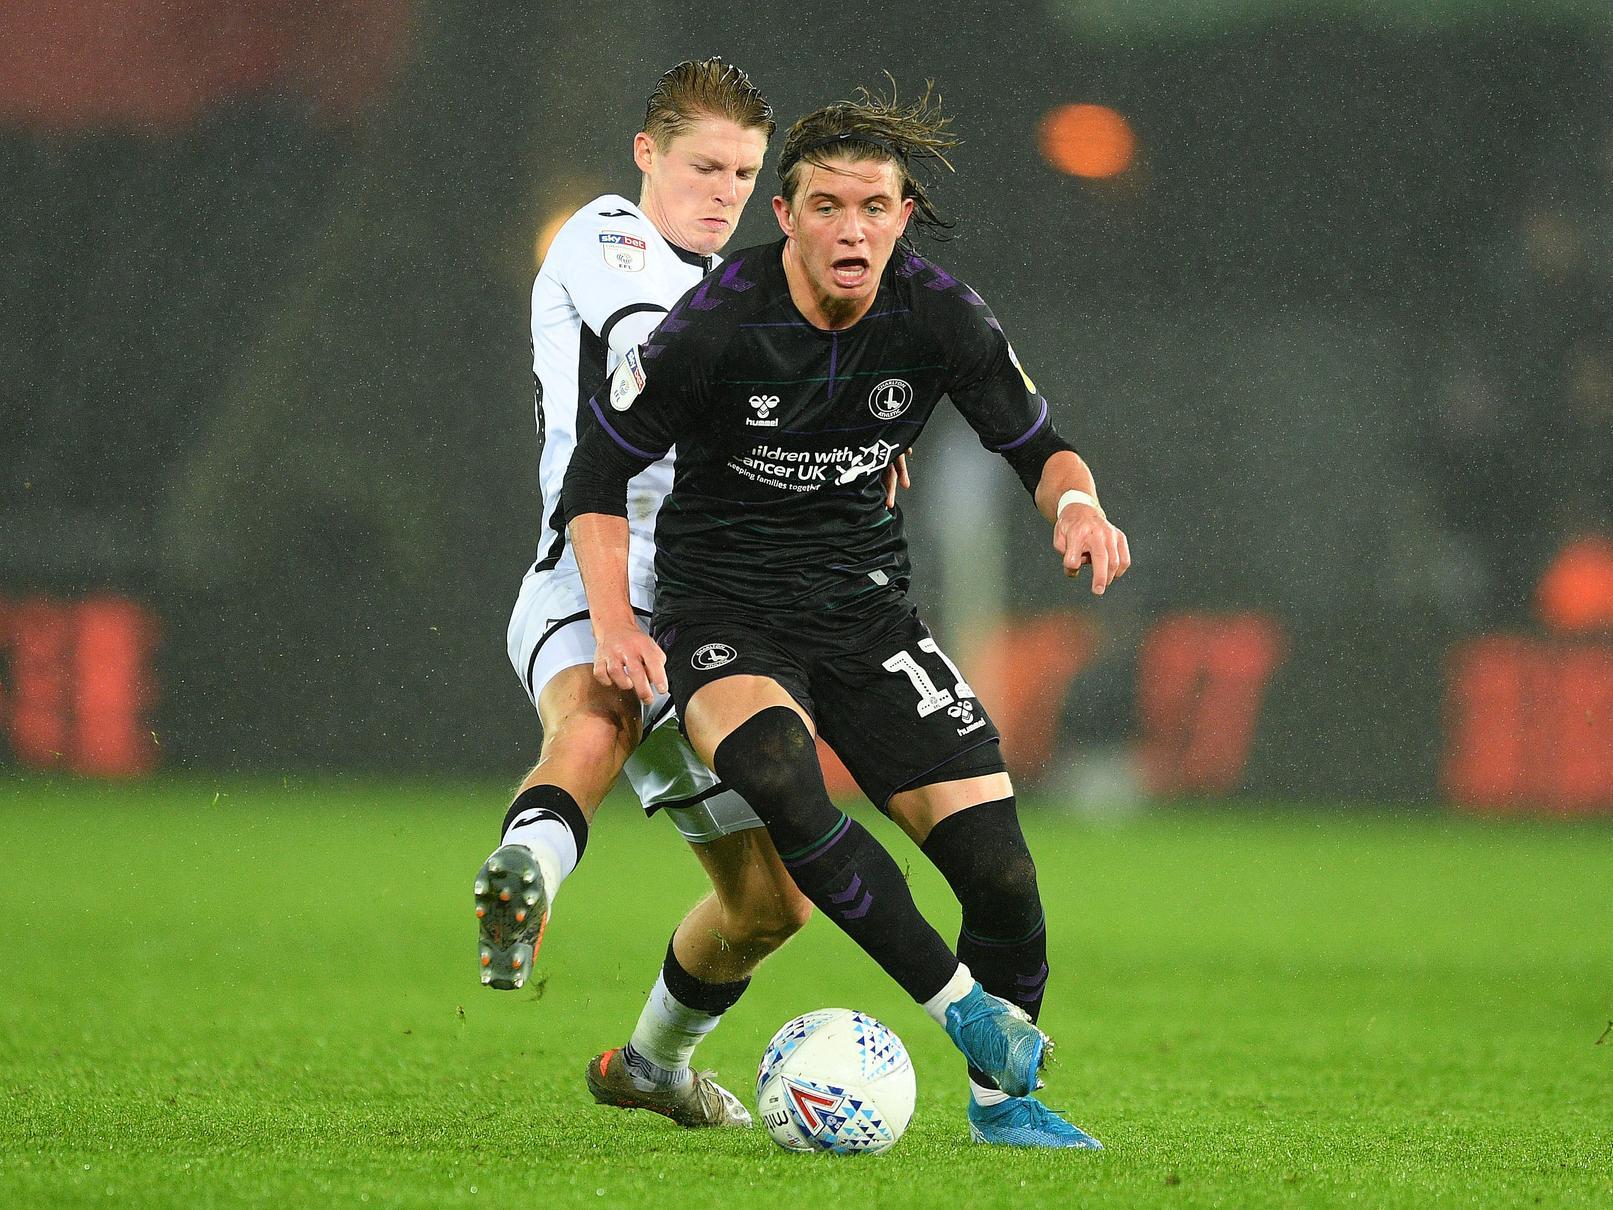 Chelsea starlet Conor Gallagher has claimed that hearing his name chanted by Charlton fans during his loan has been the highlight of his career so far. He's now on a new temporary spell with Swansea City. (Chelsea official website)